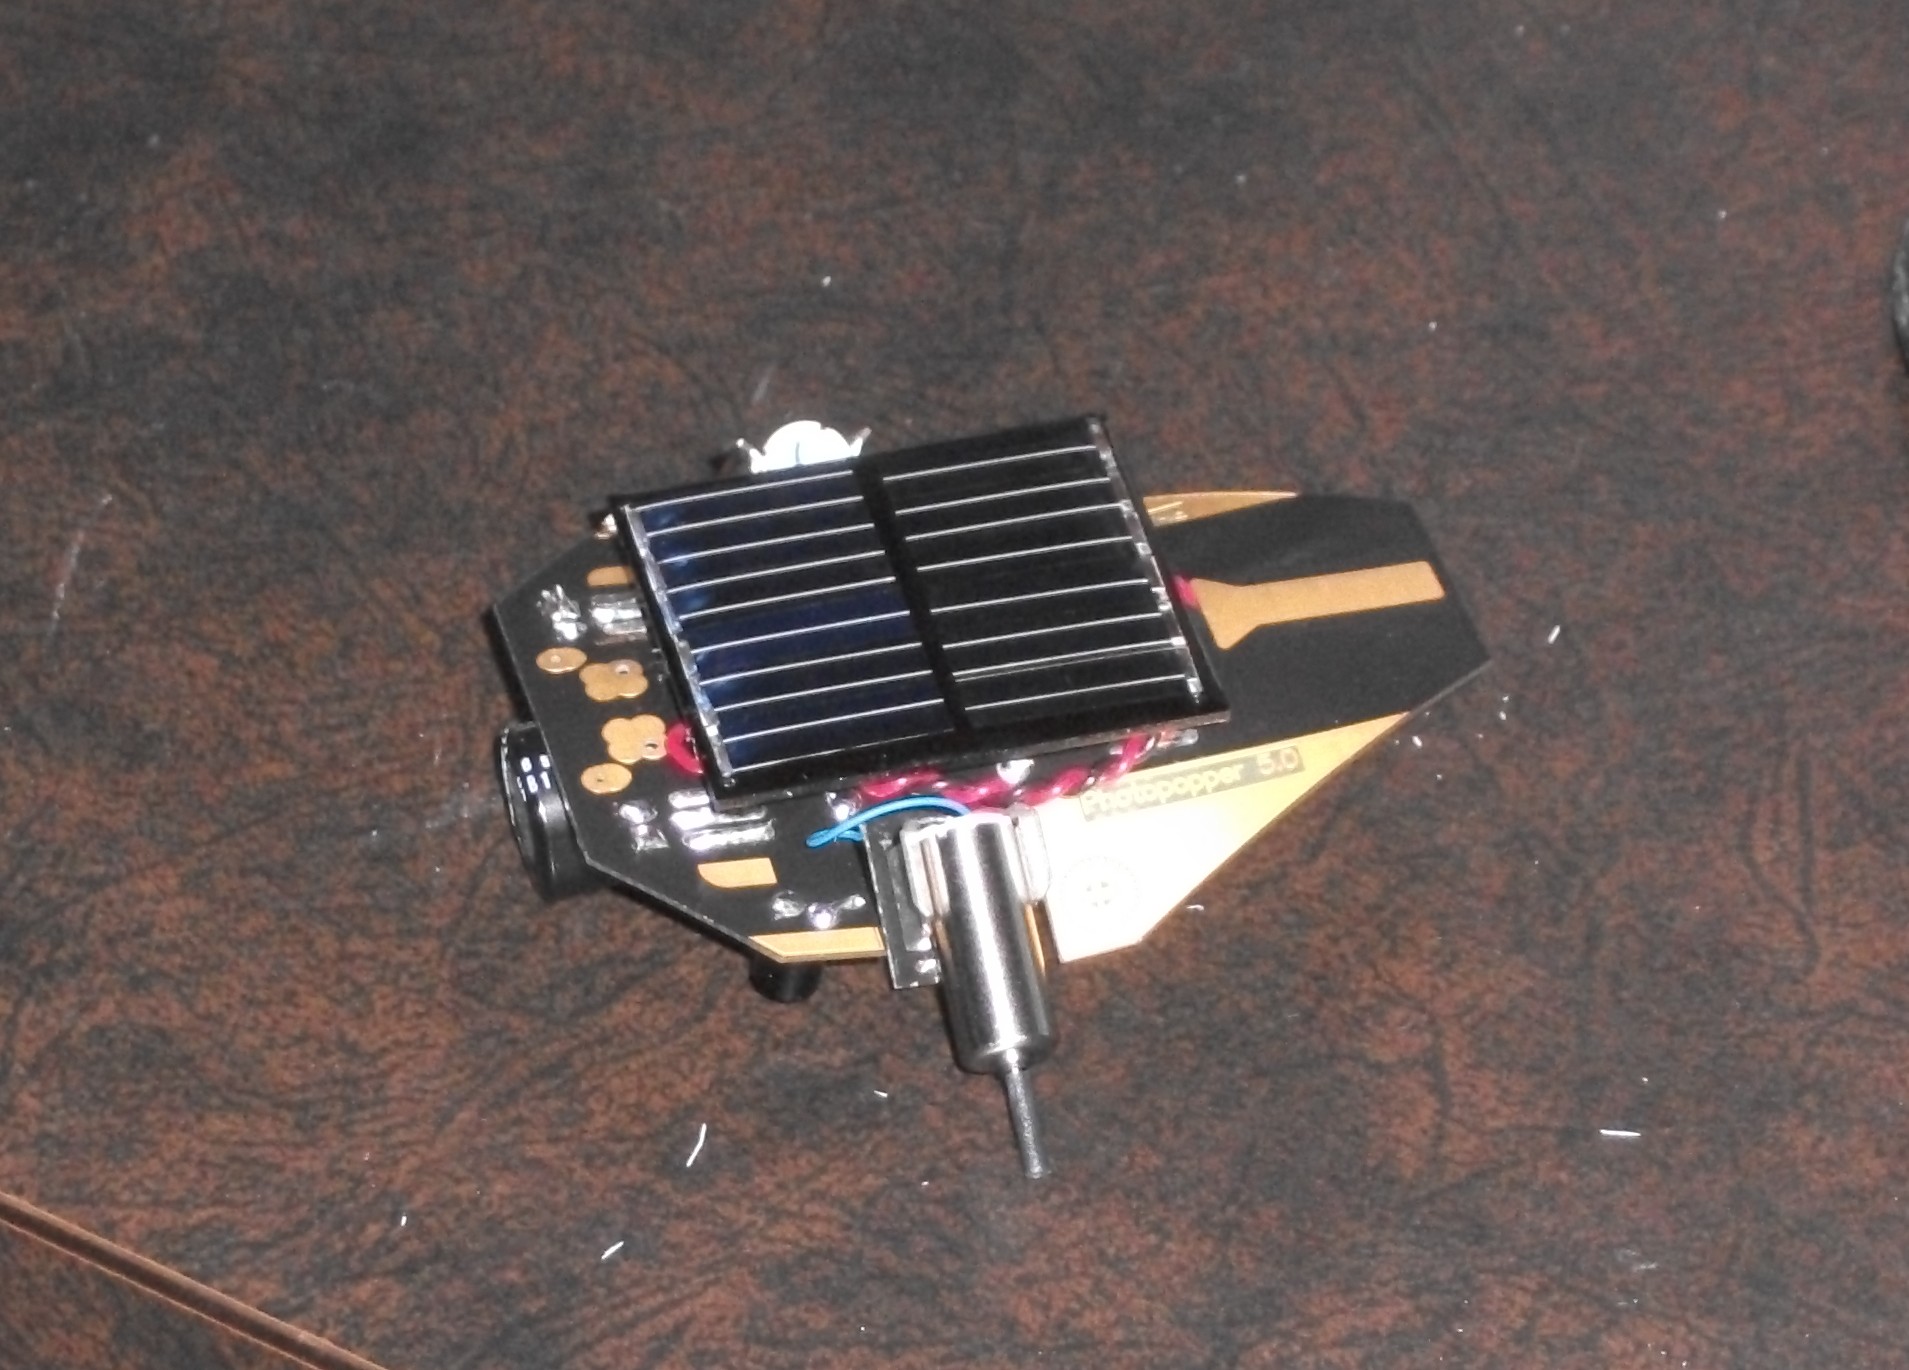 The solar panel is now attached